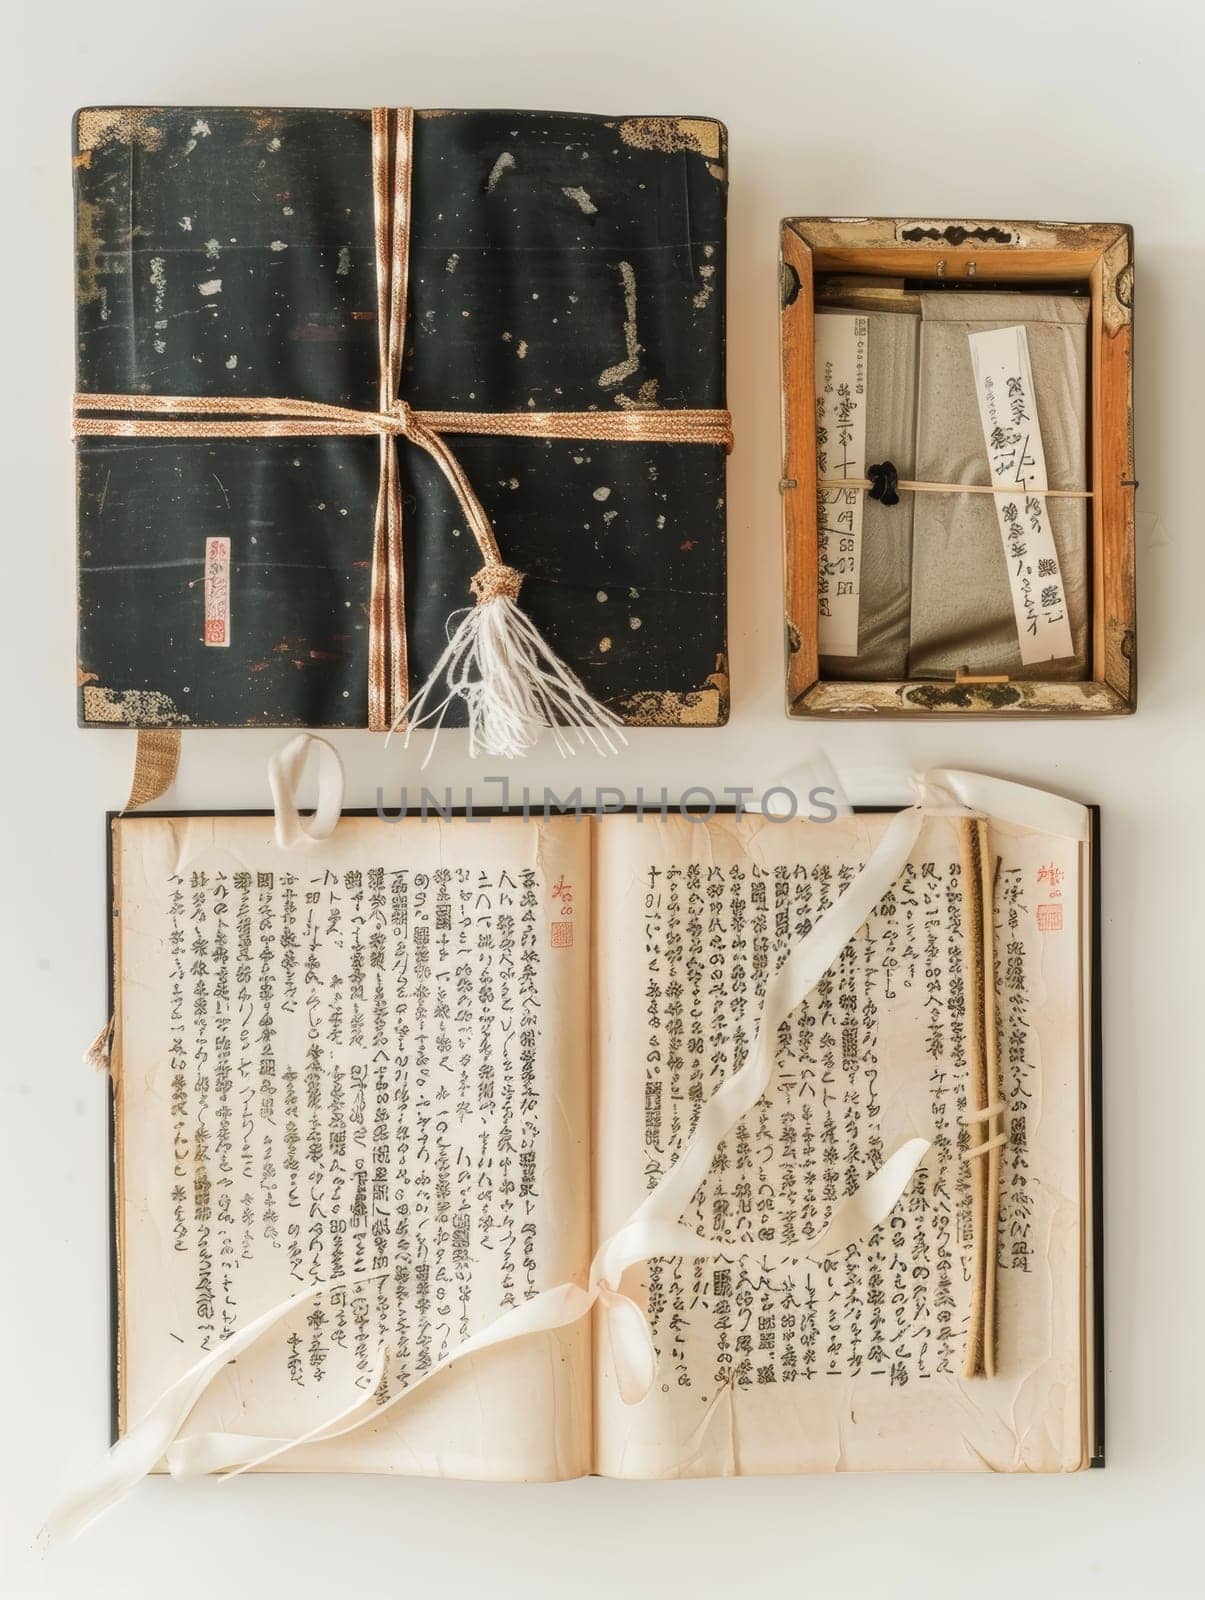 An open antique Japanese book tied with a cream ribbon, with textured pages beside a wooden box holding scroll-like items